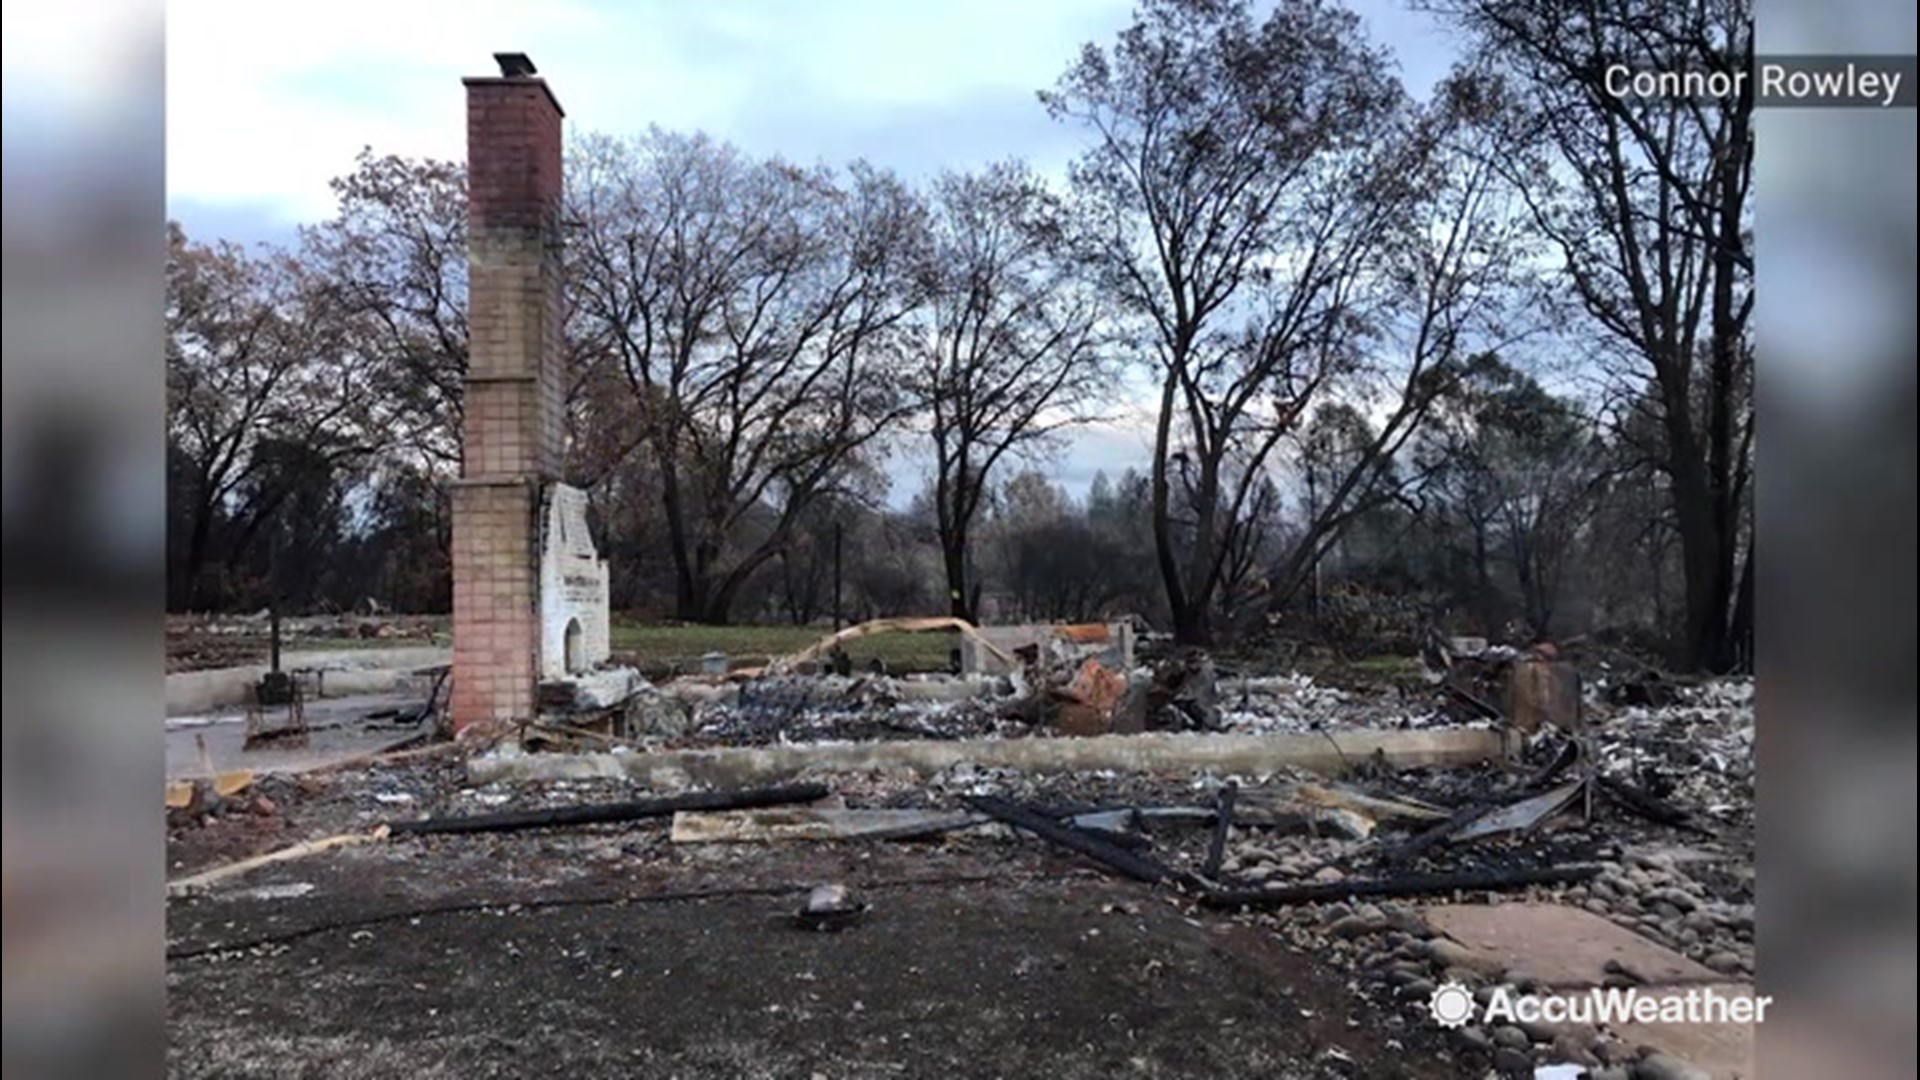 As thousands of firefighters battled the Camp Fire in Northern California last year, one firefighter was scrambling to get his family to safety before his home was destroyed. AccuWeather's Bill Wadell shows us the progress made and the work that needs to be done to rebuild Paradise.